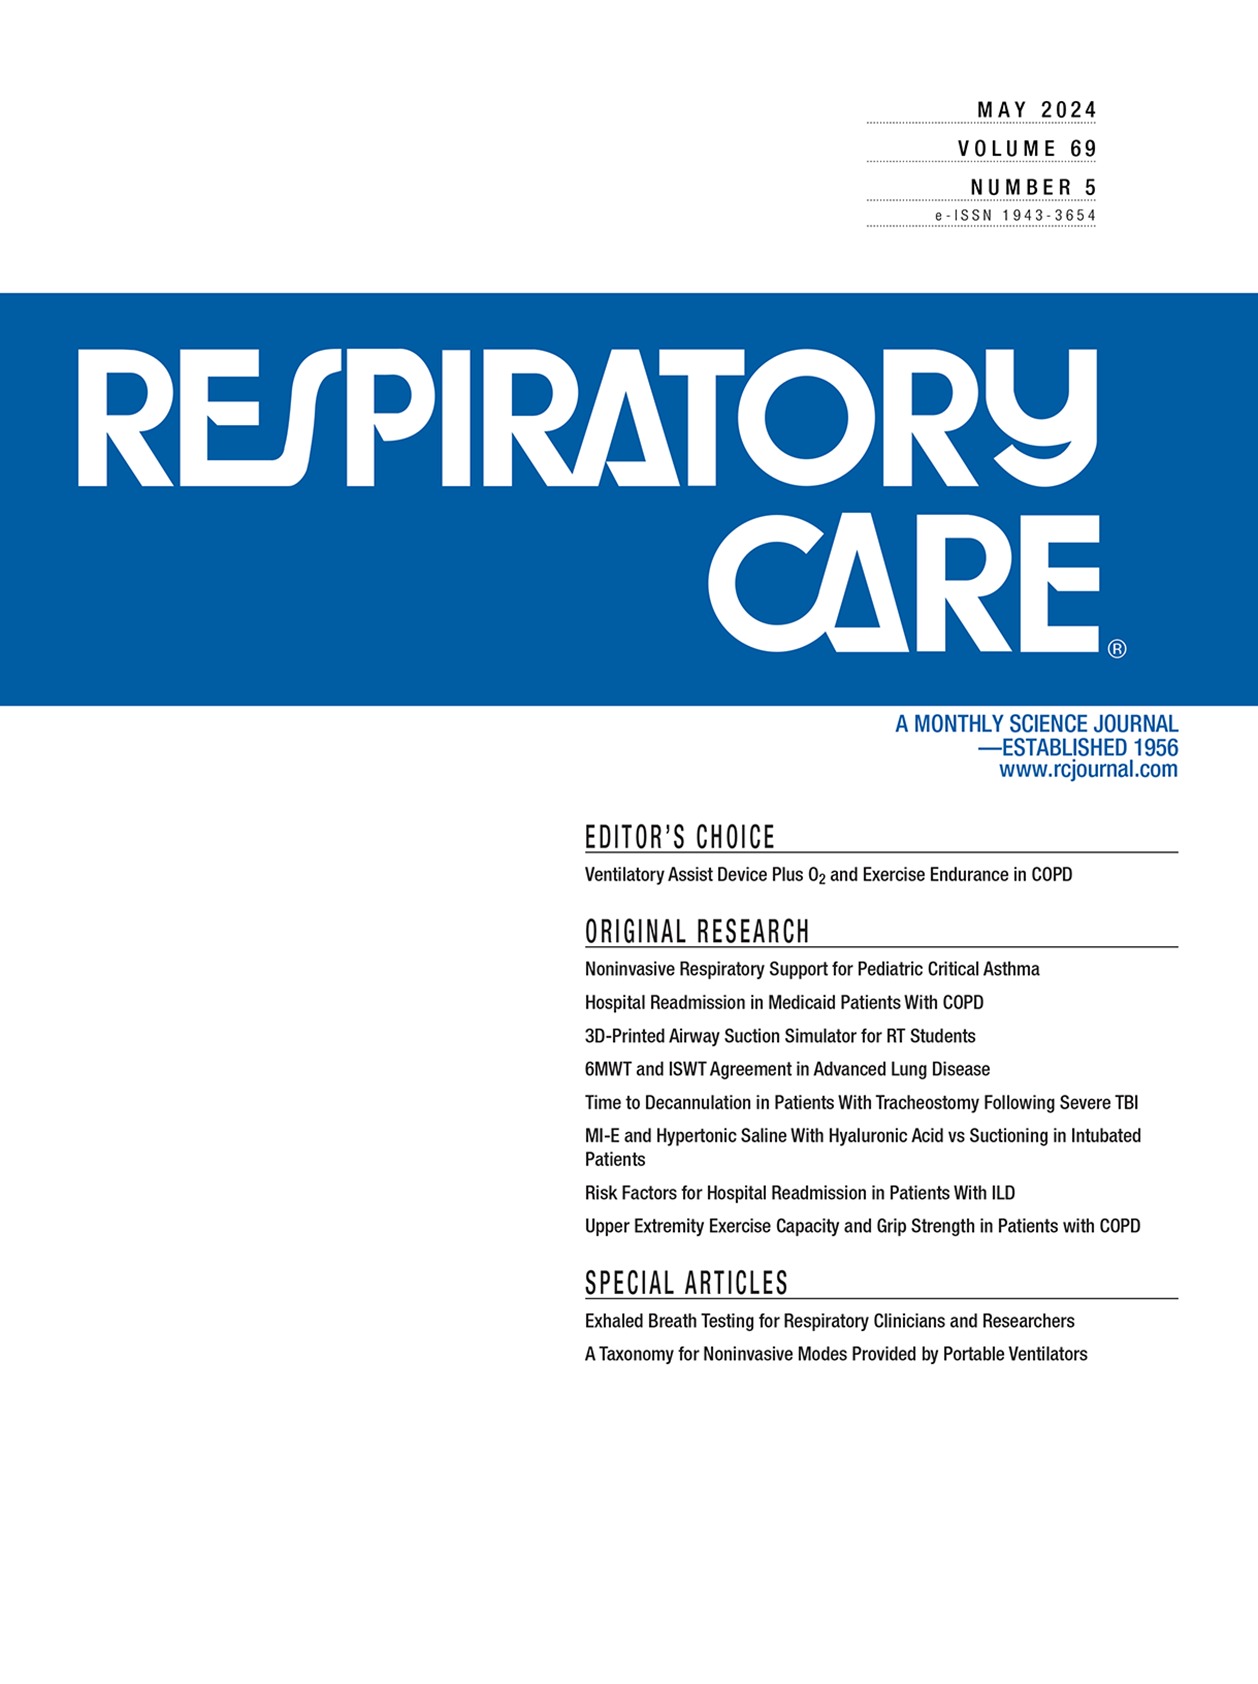 Predicting Hospital Readmission in Medicaid Patients With COPD Using Administrative and Claims Data